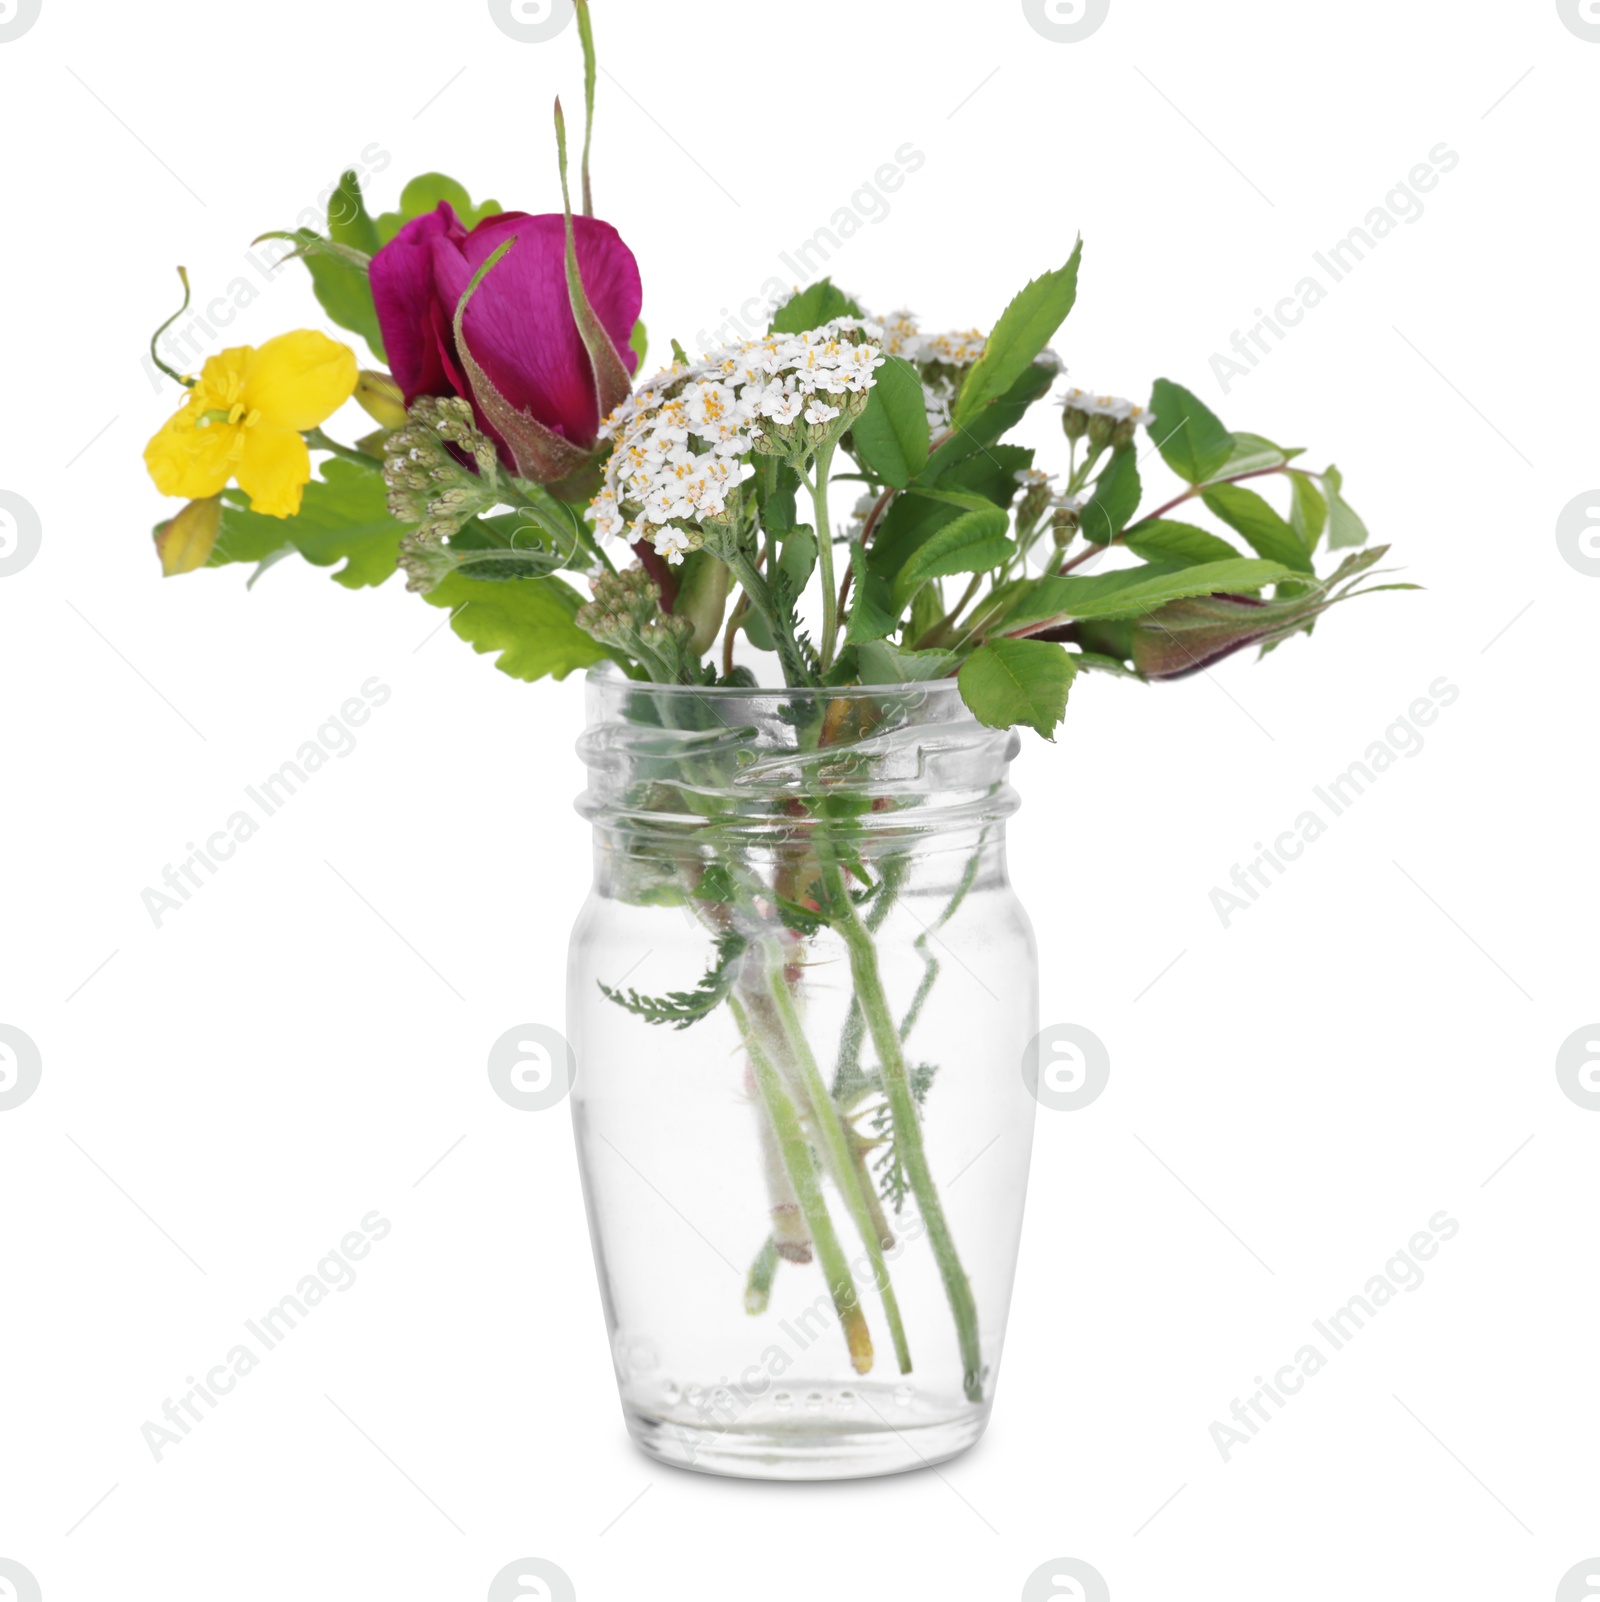 Photo of Different flowers in glass vase isolated on white